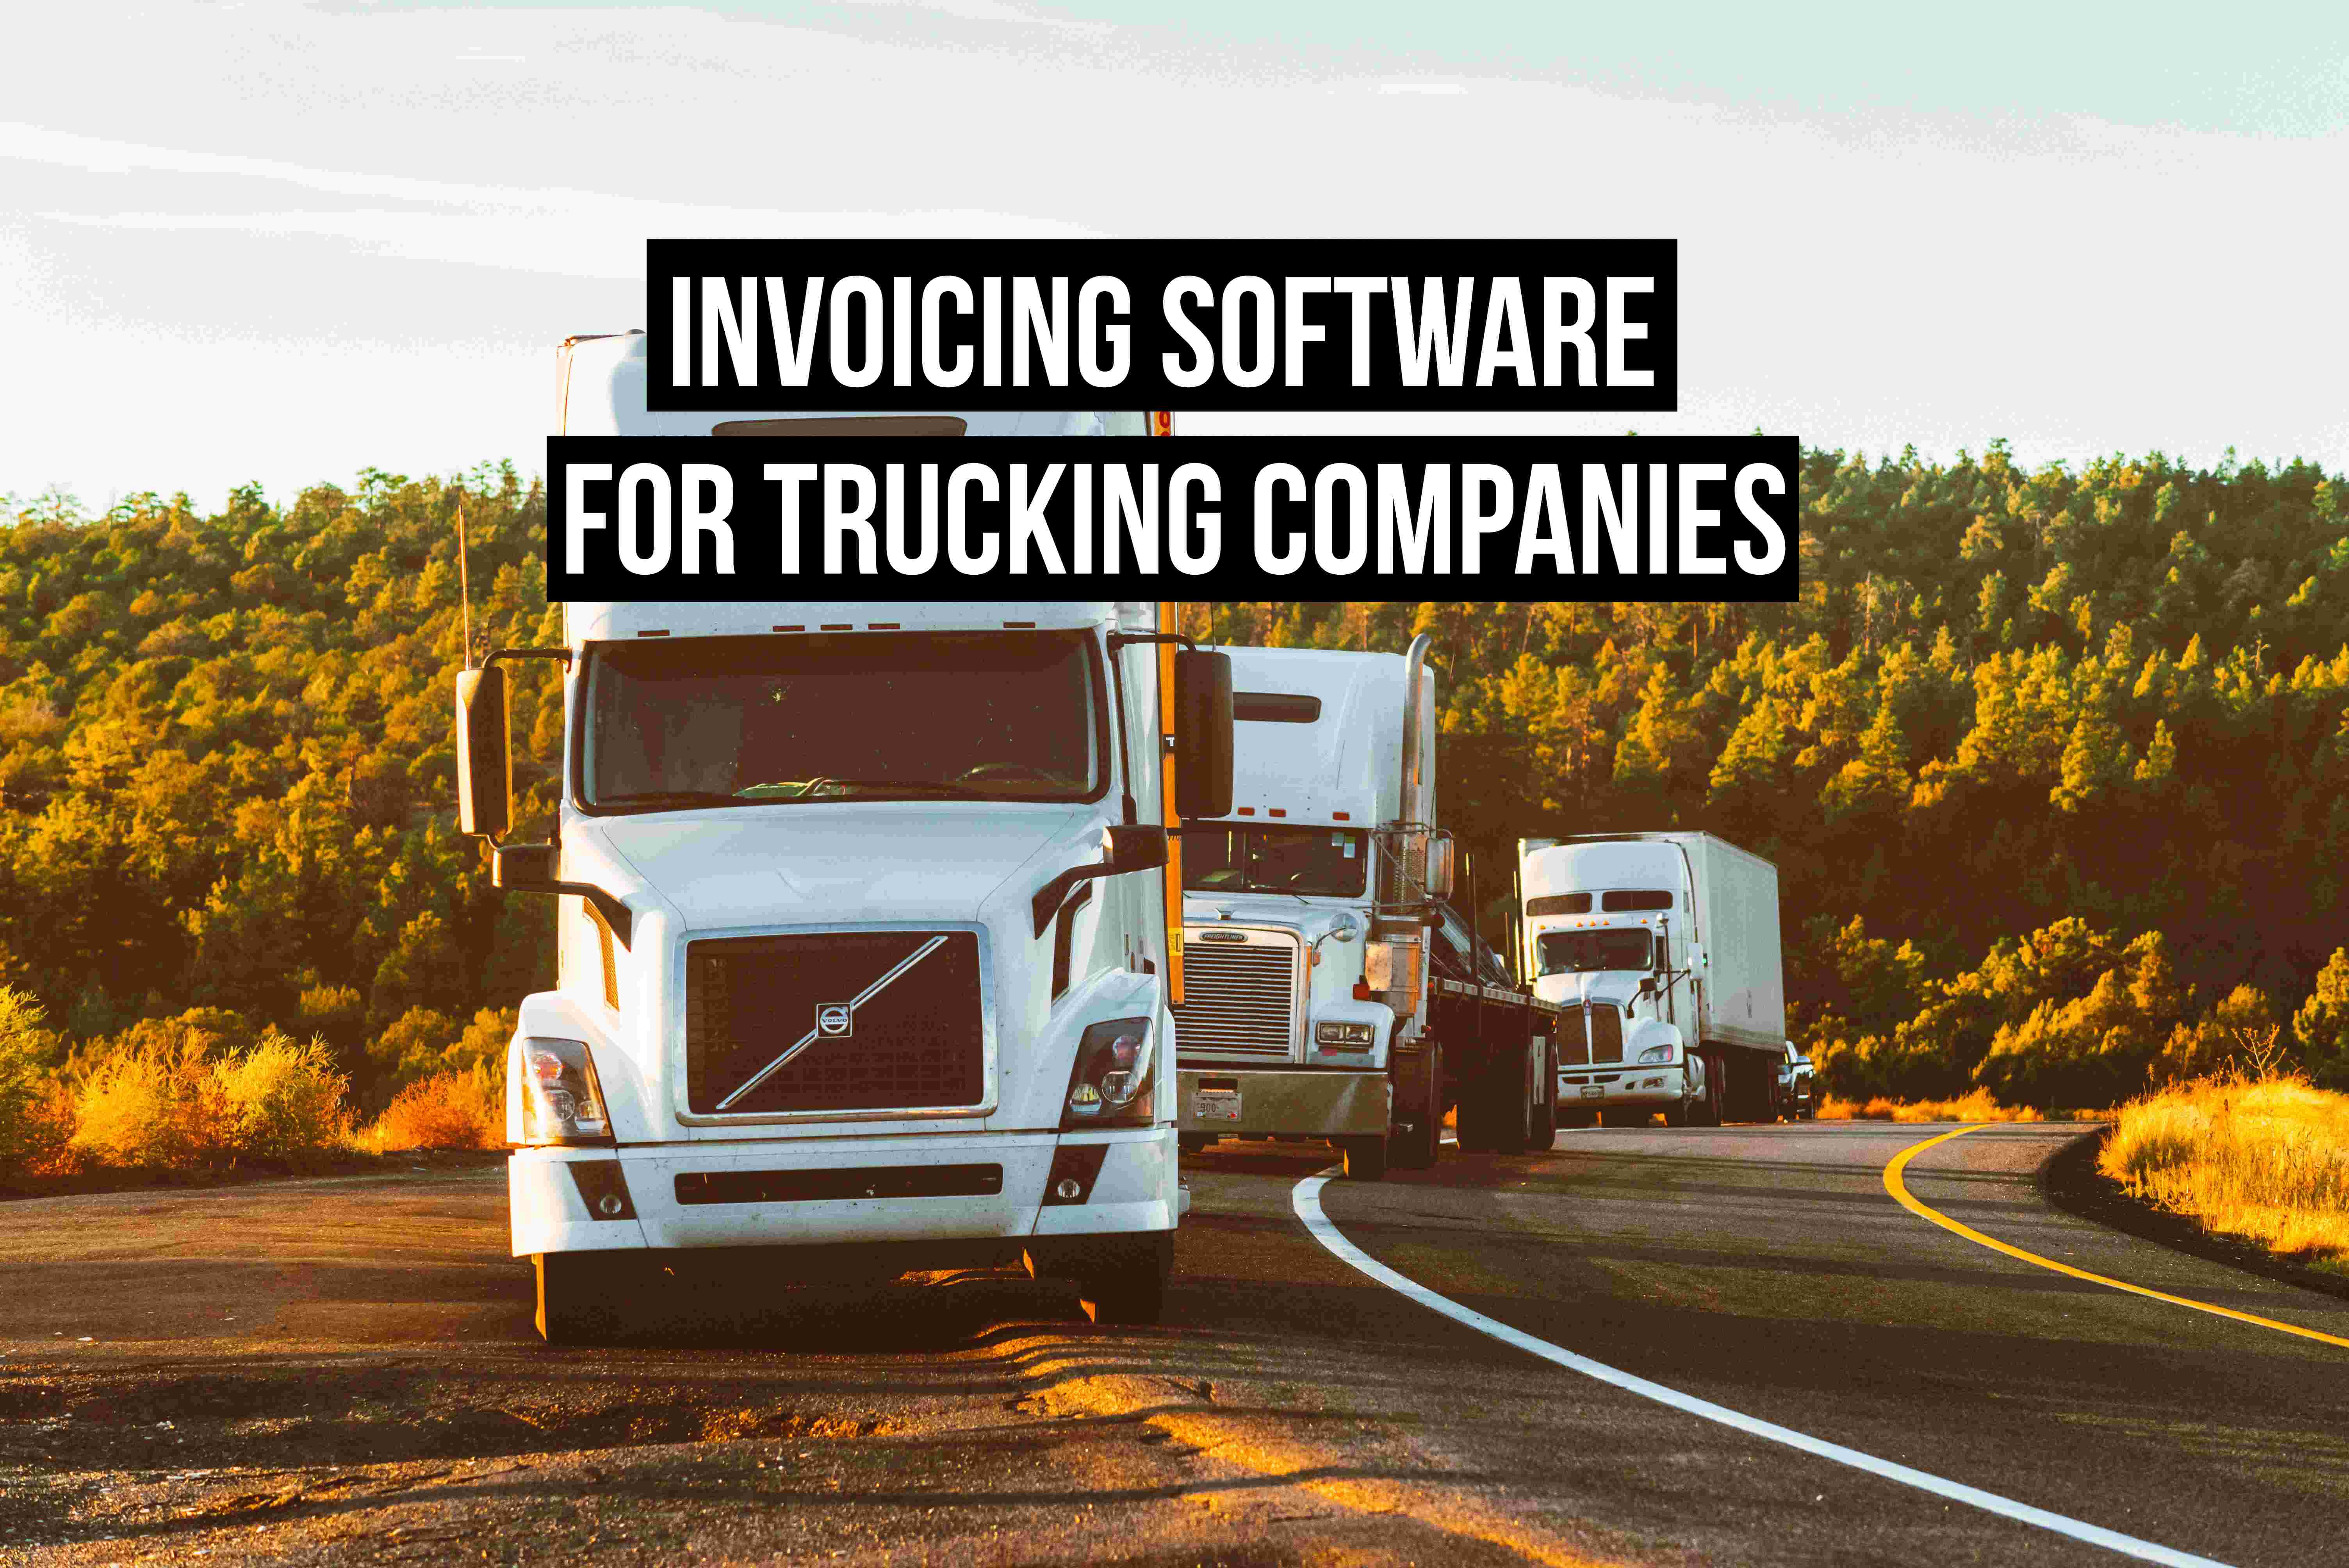 Invoicing software for trucking companies title truck image